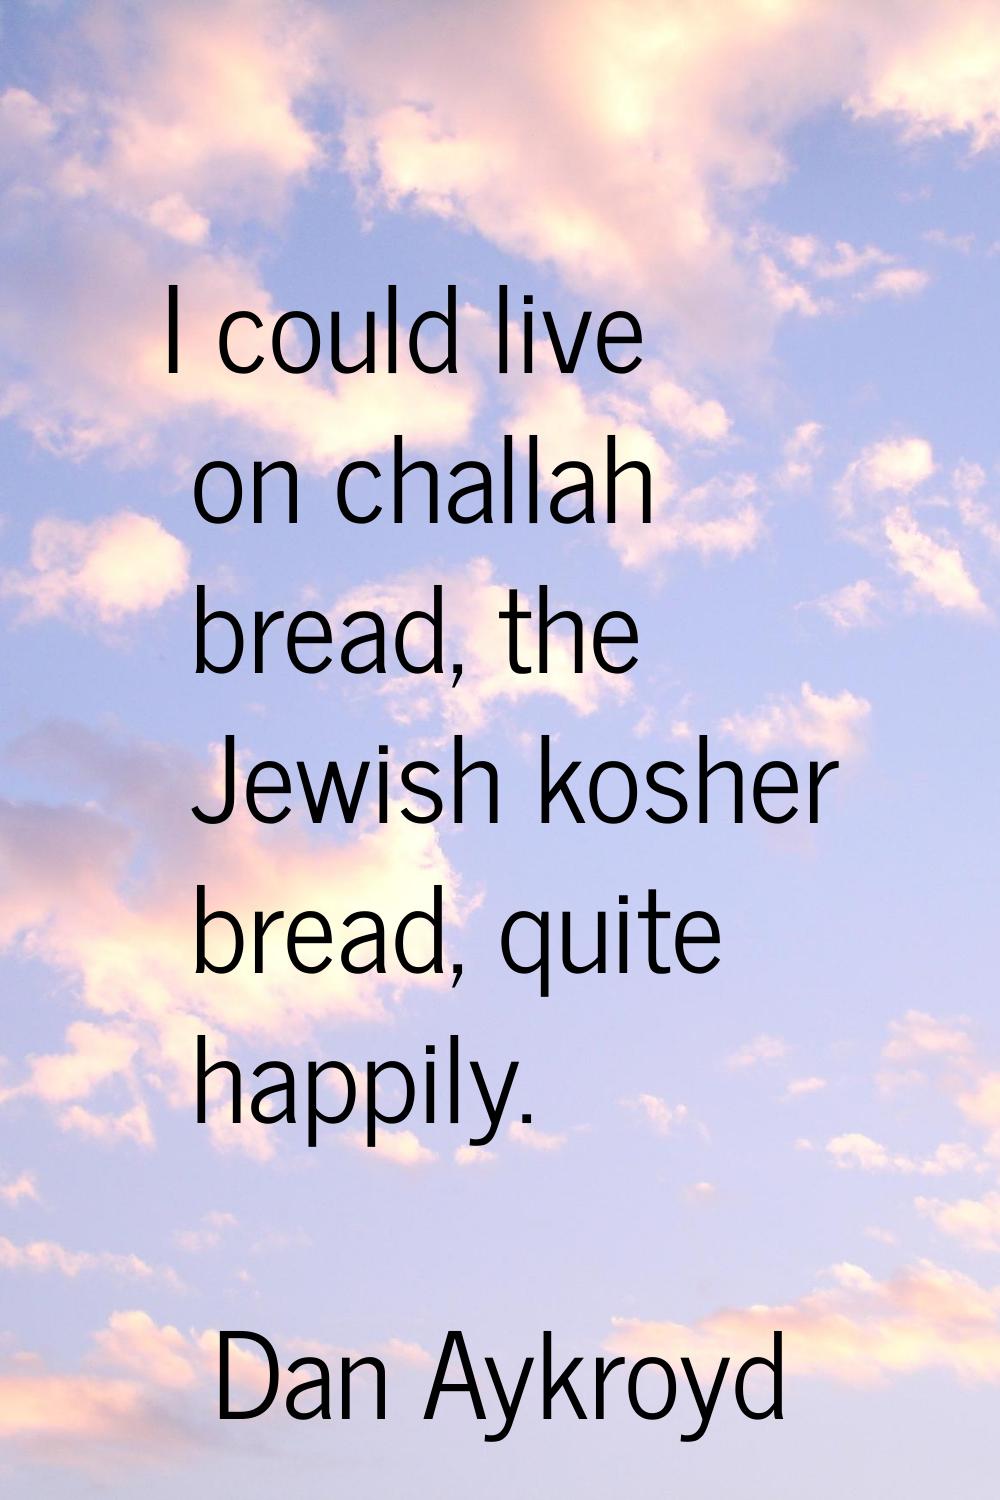 I could live on challah bread, the Jewish kosher bread, quite happily.